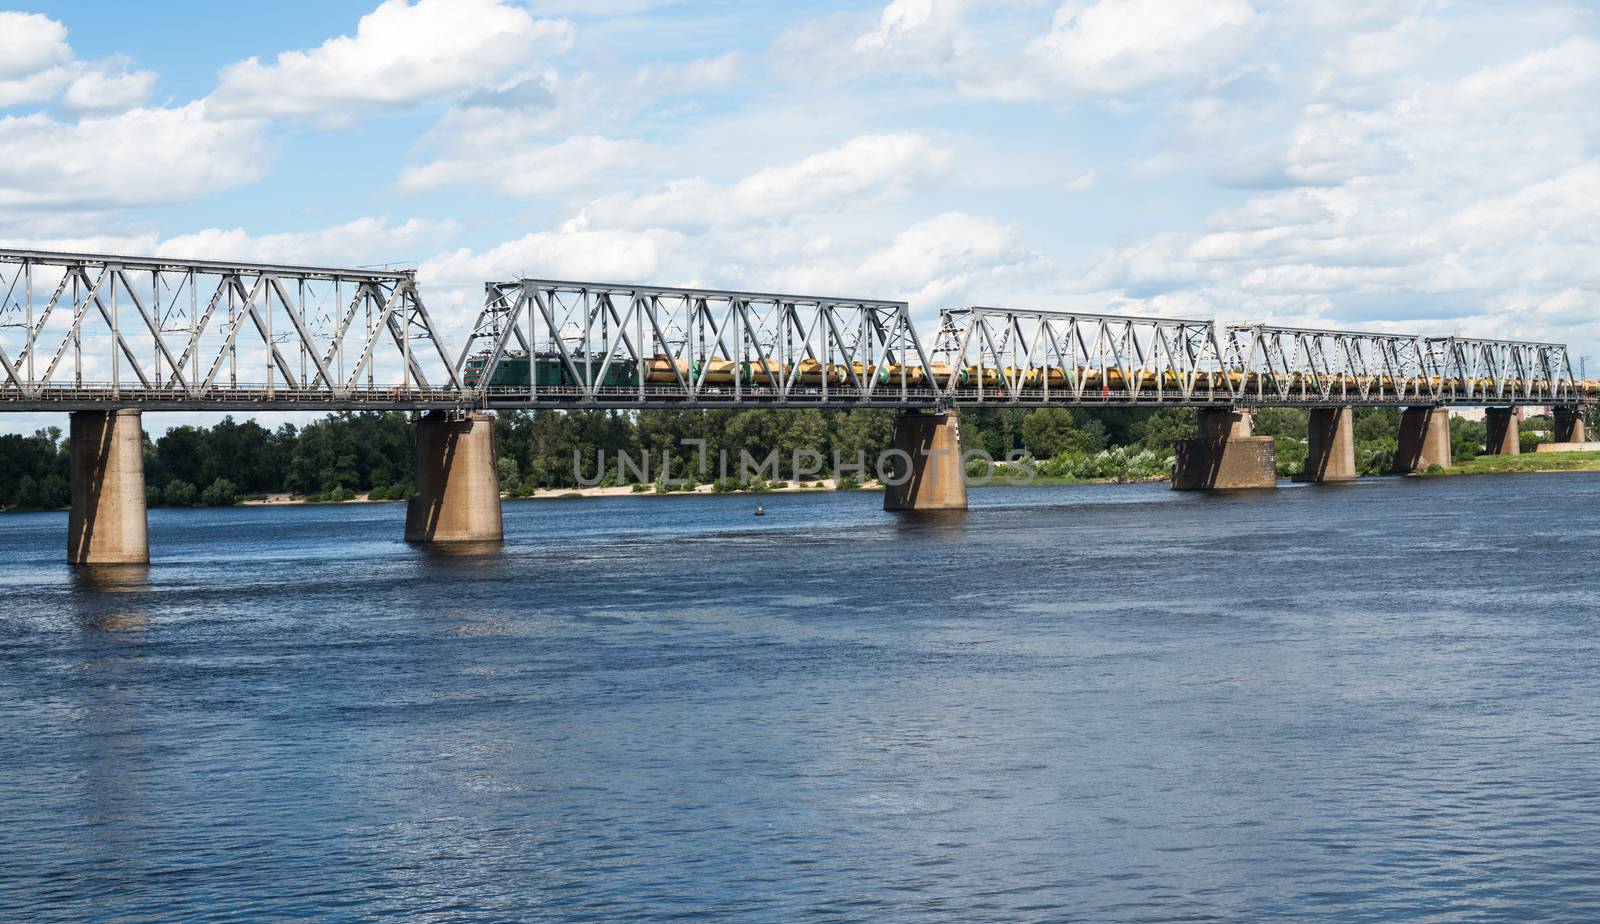 Railroad bridge in Kyiv across the Dnieper with freight train by rootstocks